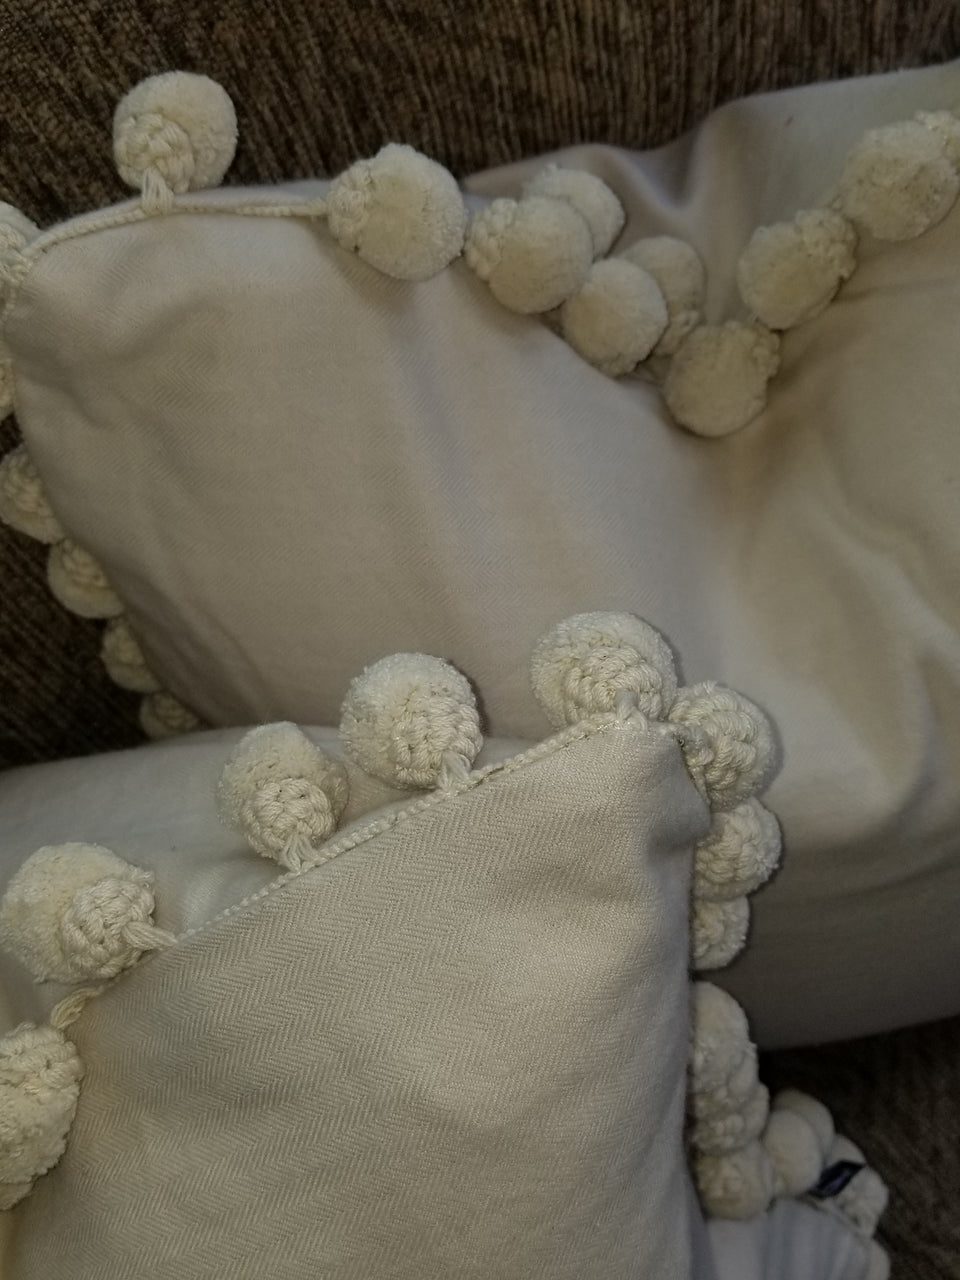 18 x 18 cream pom pom pillow covers on brown couch with beige throw cover top view detail